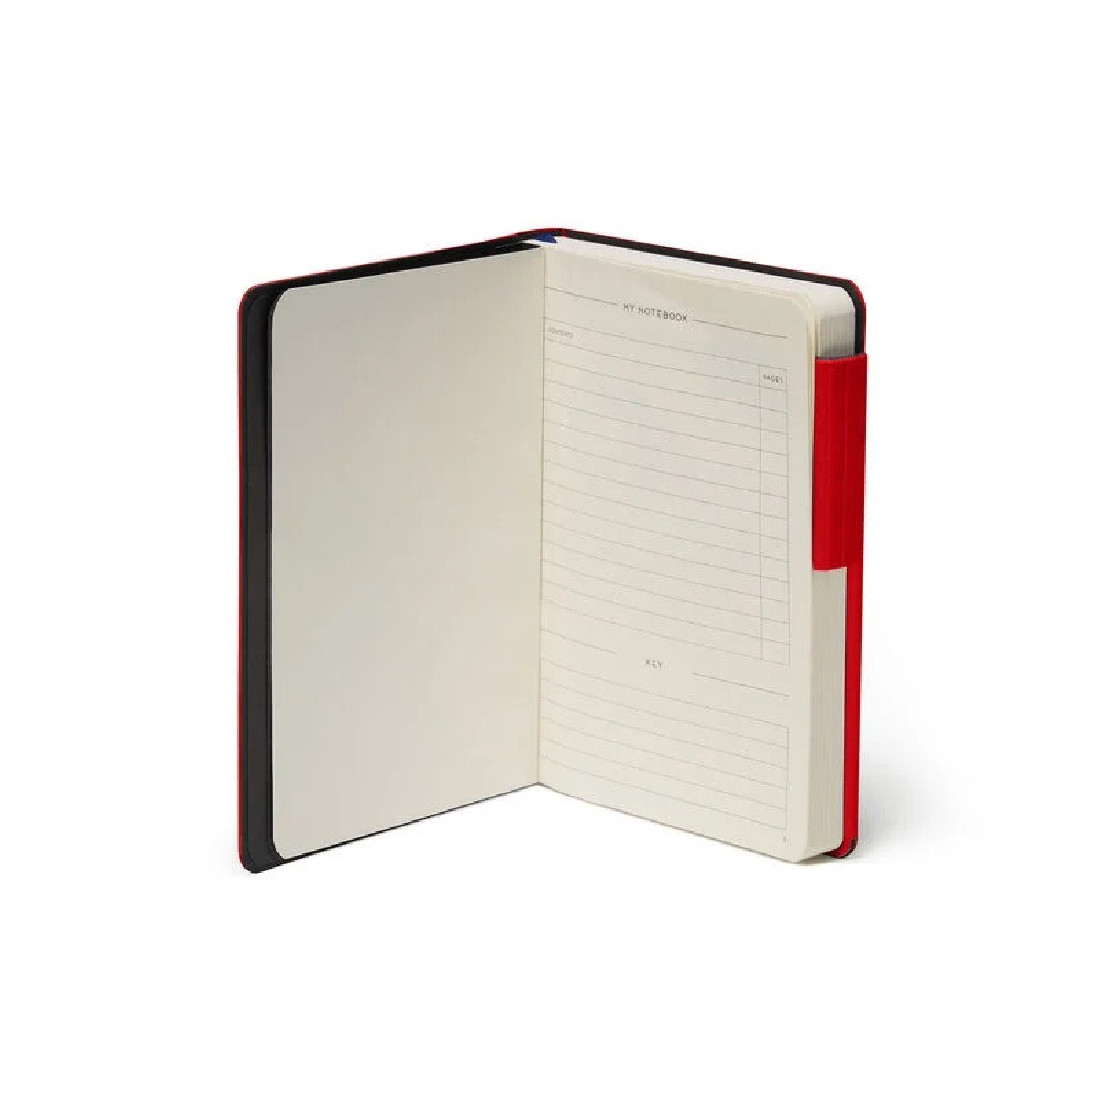 My Notebook - Lined - Small - Red Cover LEGAMI